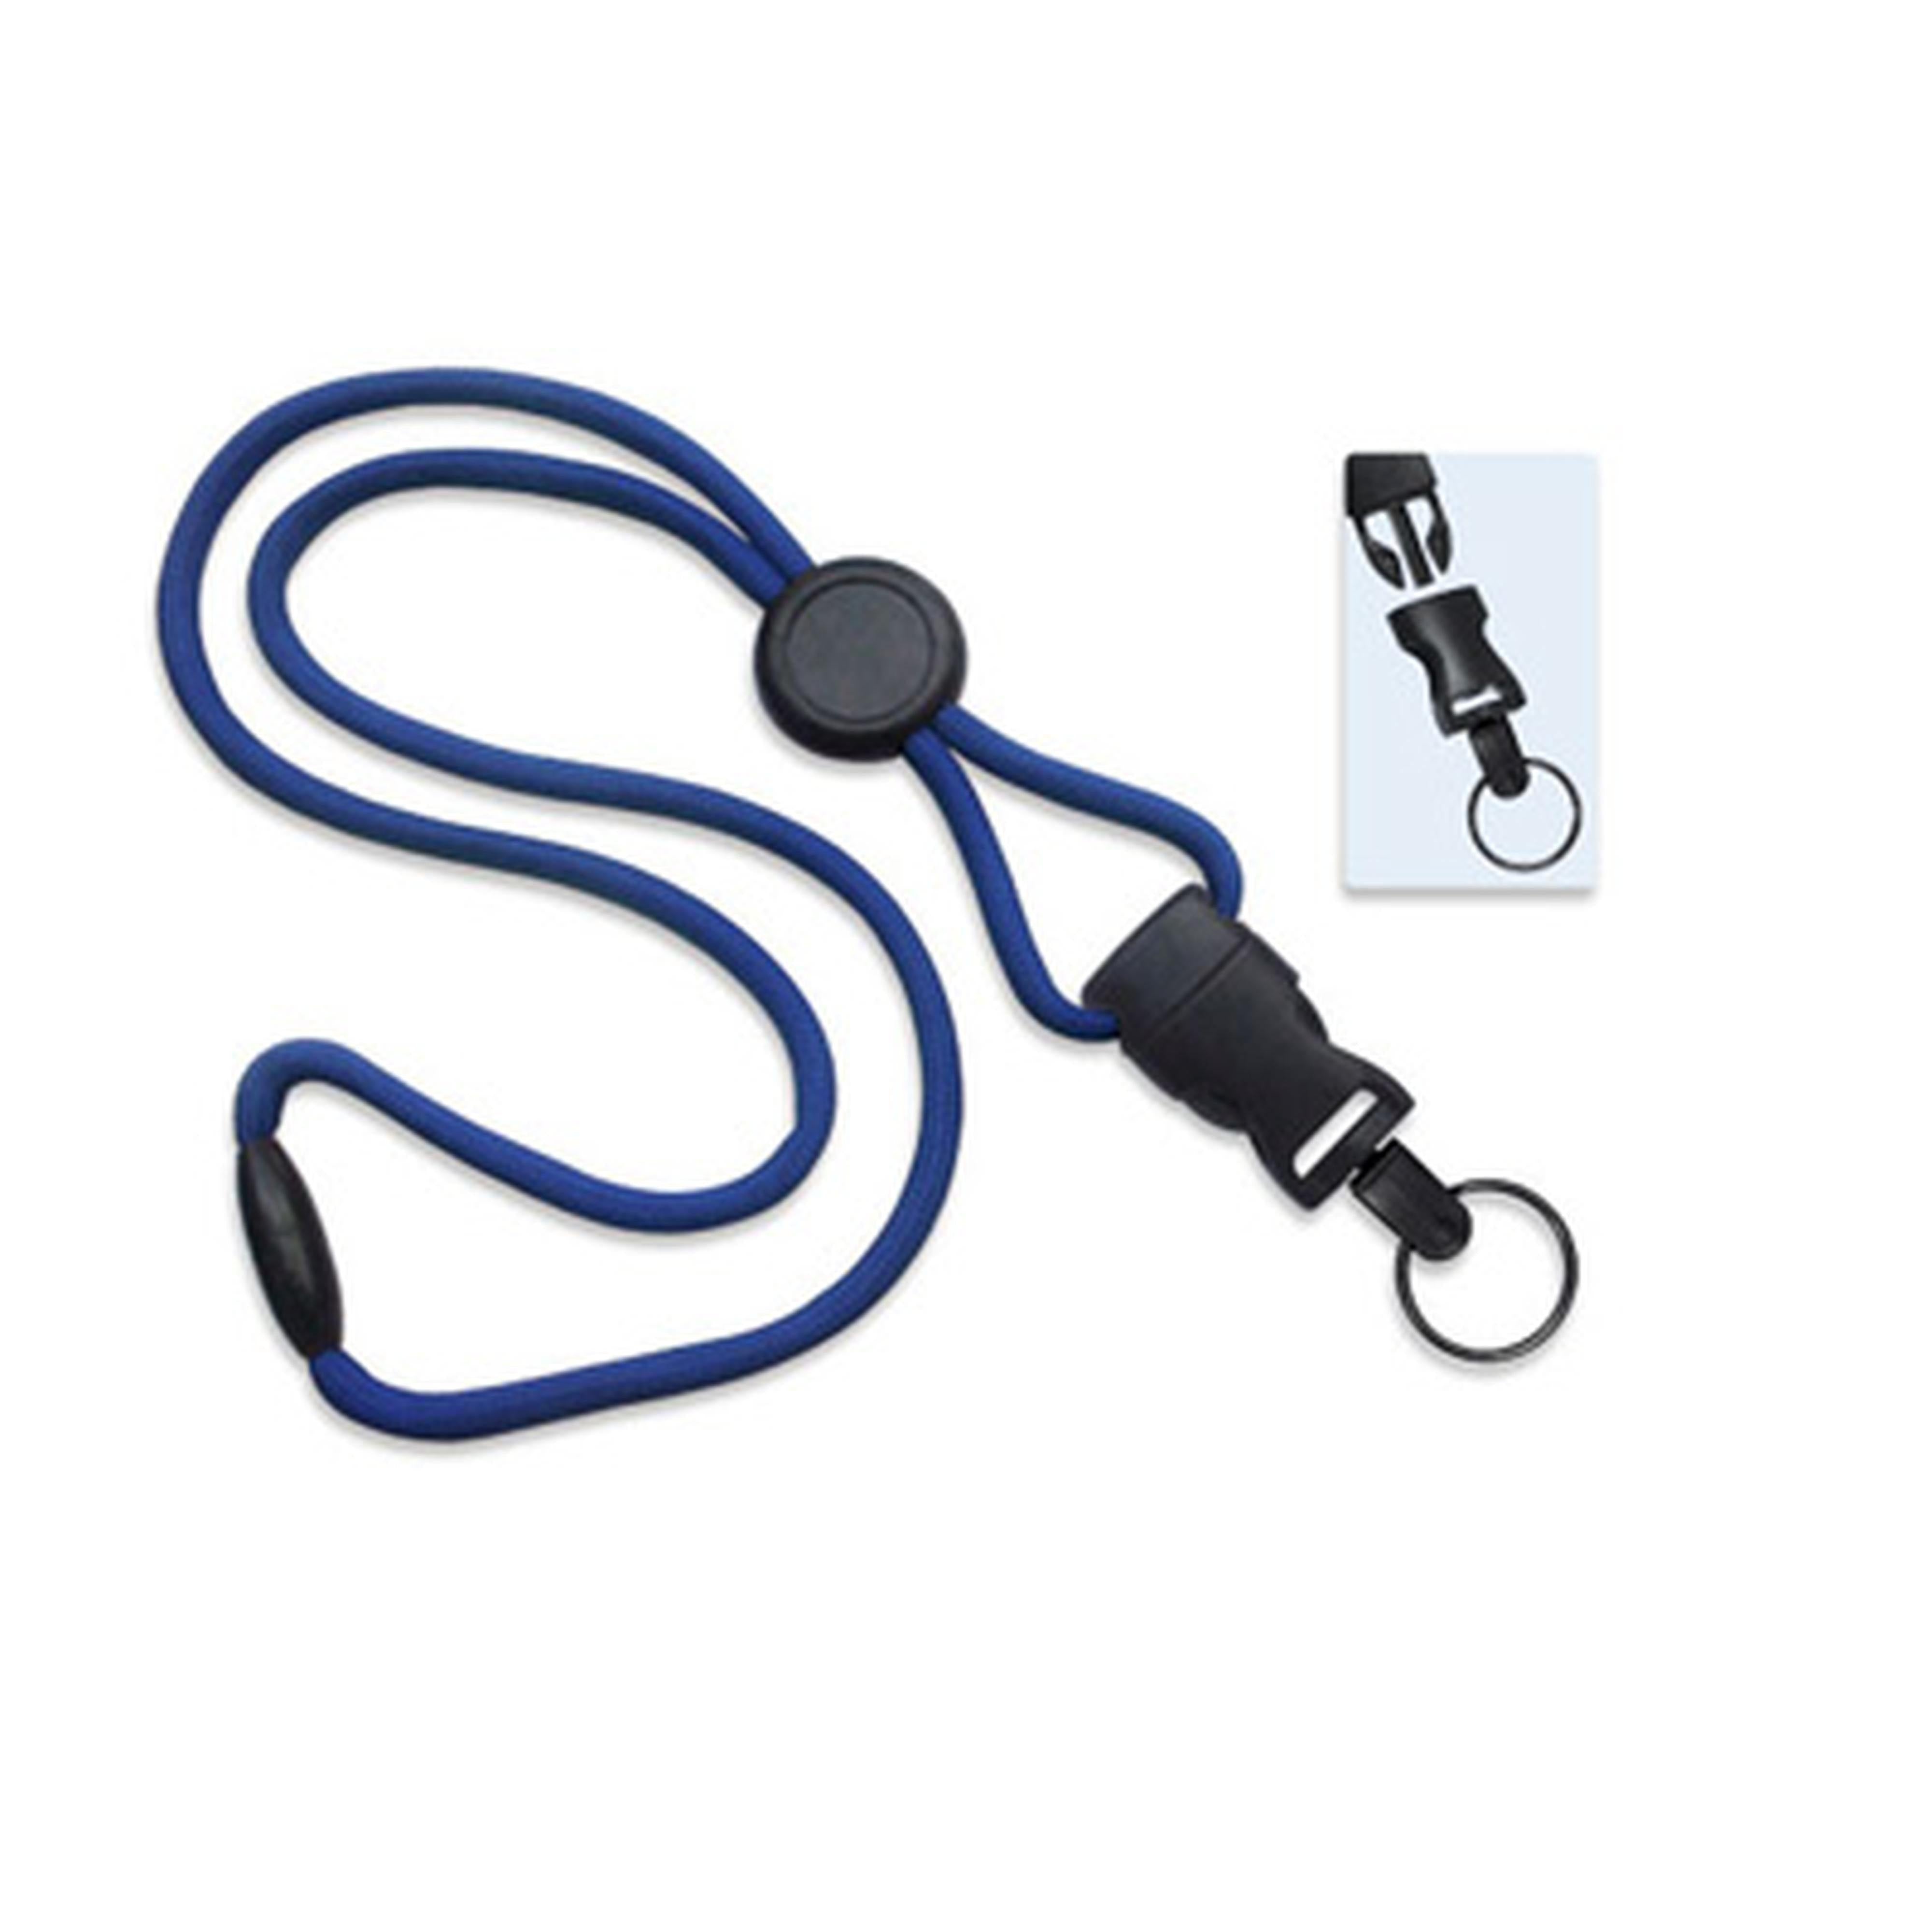 Full Color Custom ID Lanyards With 2 Badge Clips or 2 Hooks